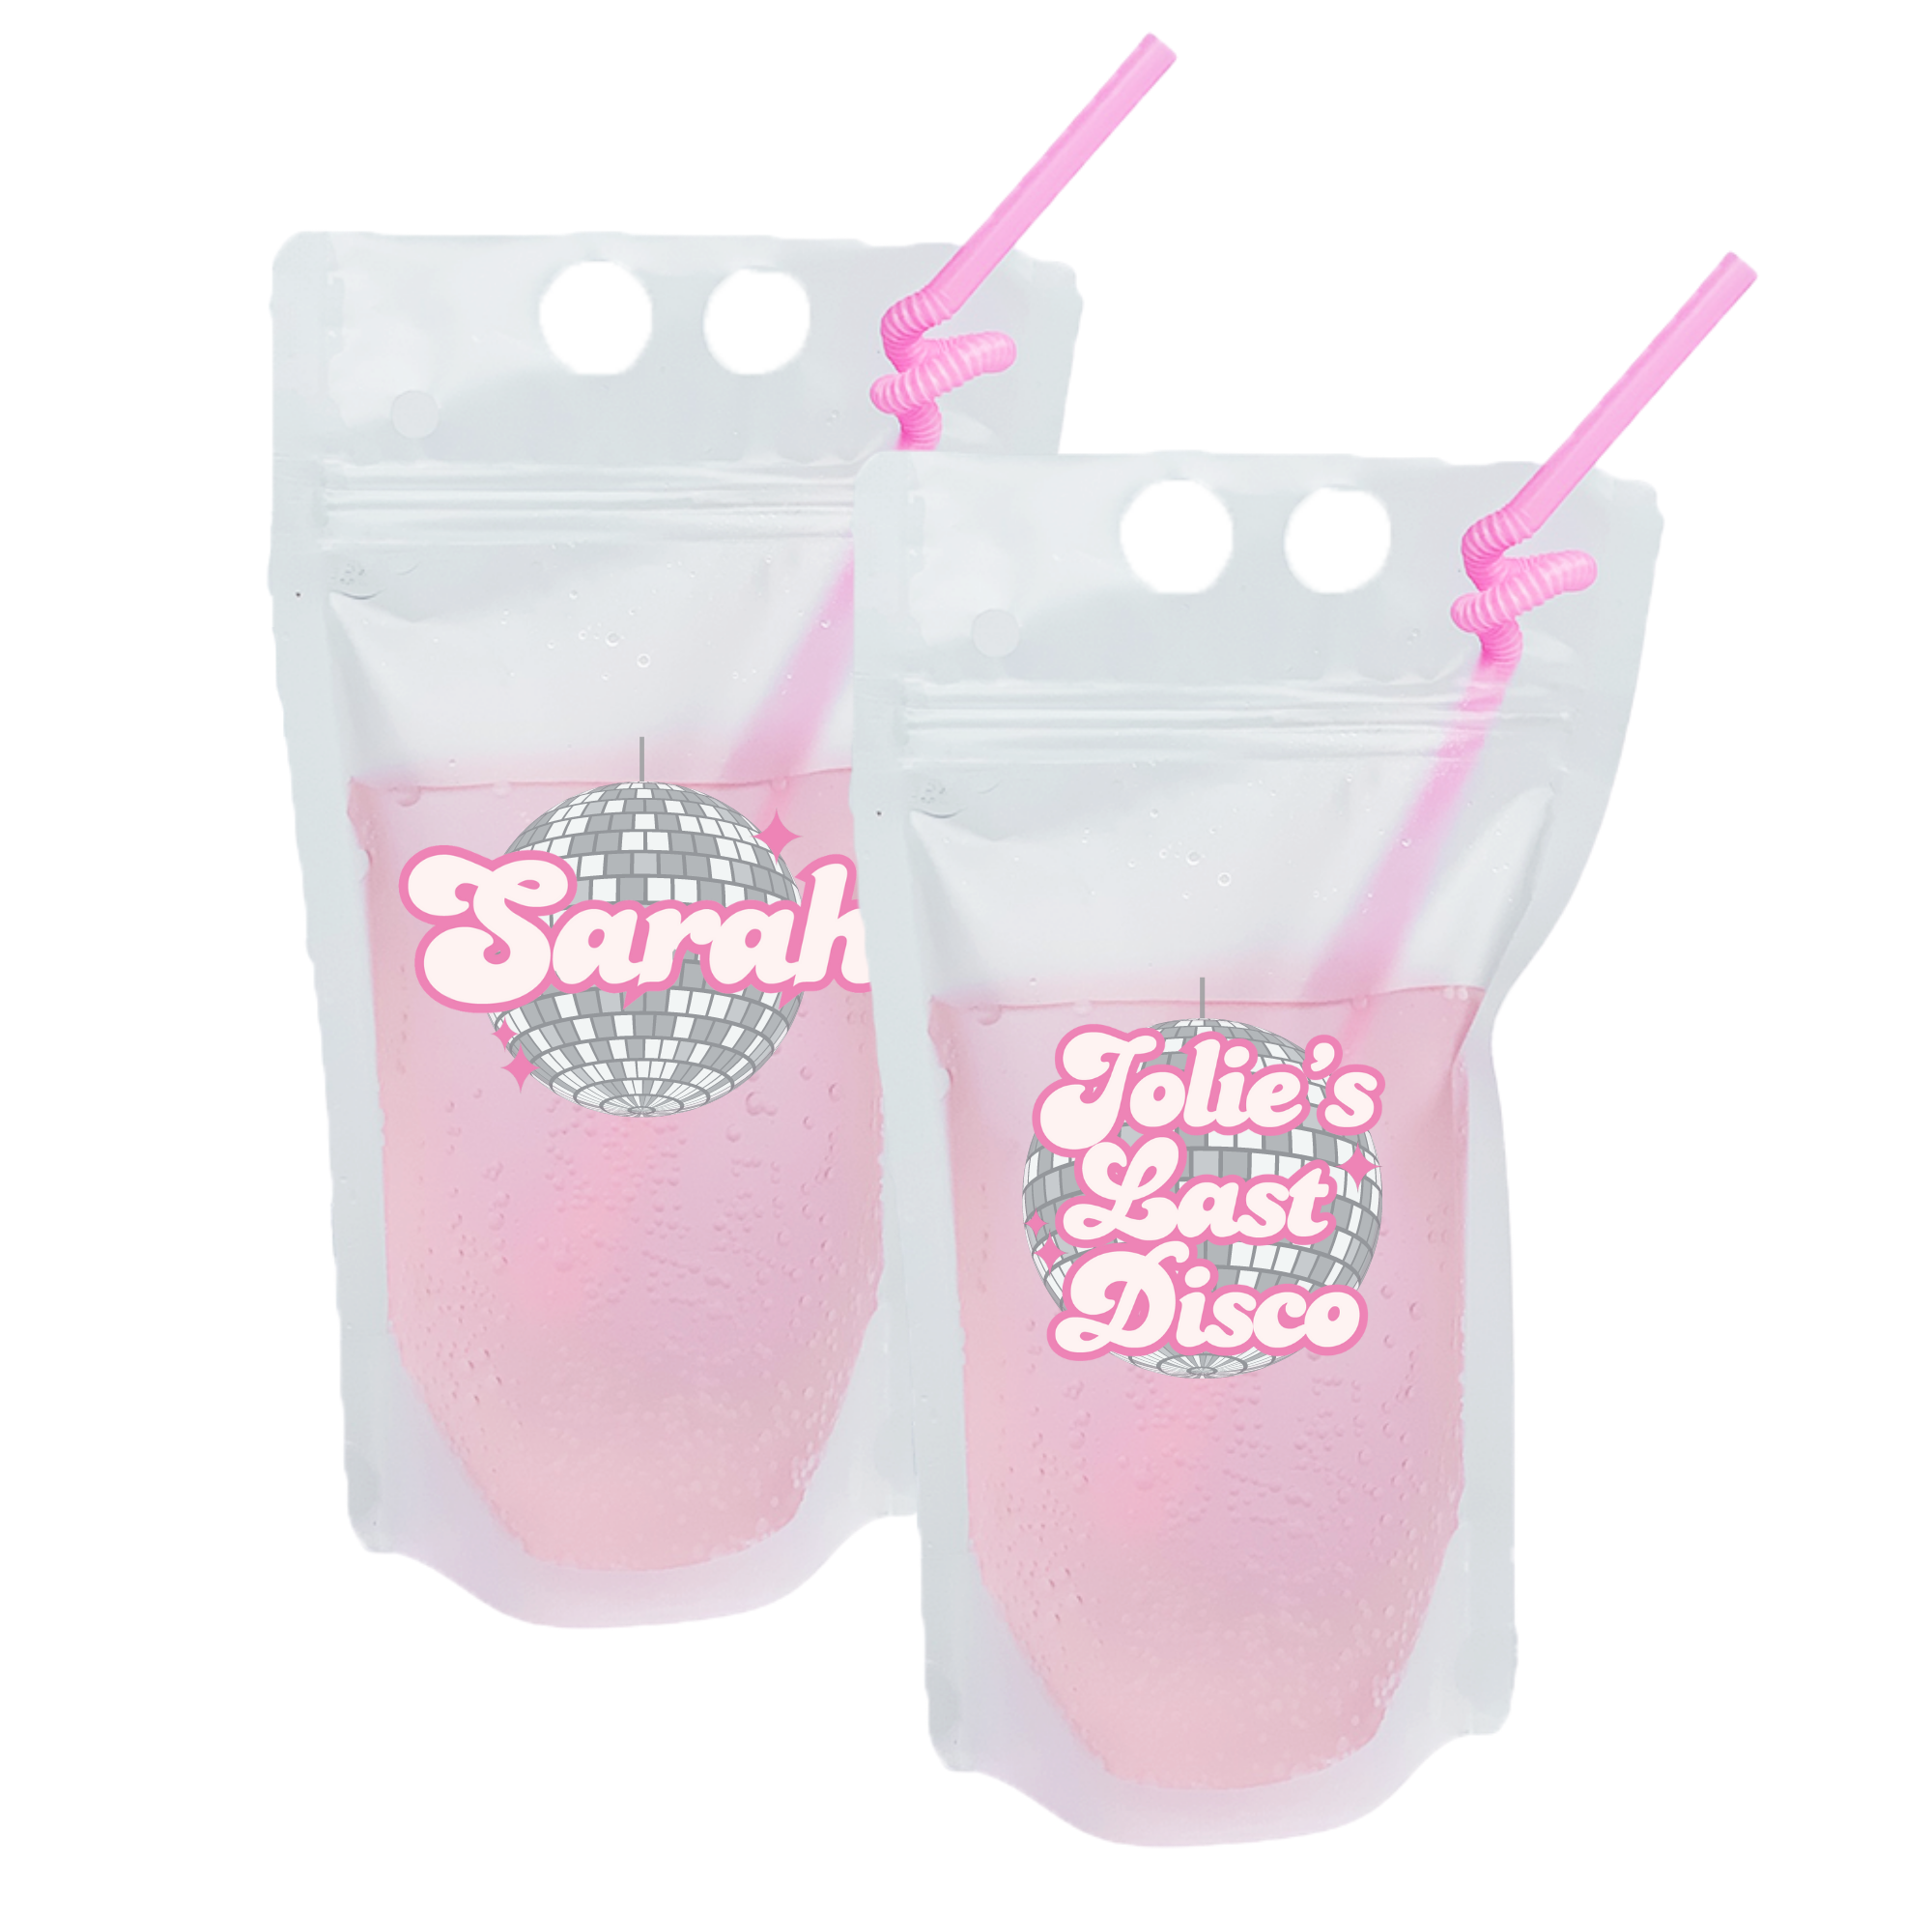 Personalized Drink Pouch Custom Adult Beverage Plastic Pouches Great for  Girls Trips, Beach, Pool Party, Bachelorette Party or for Kids 